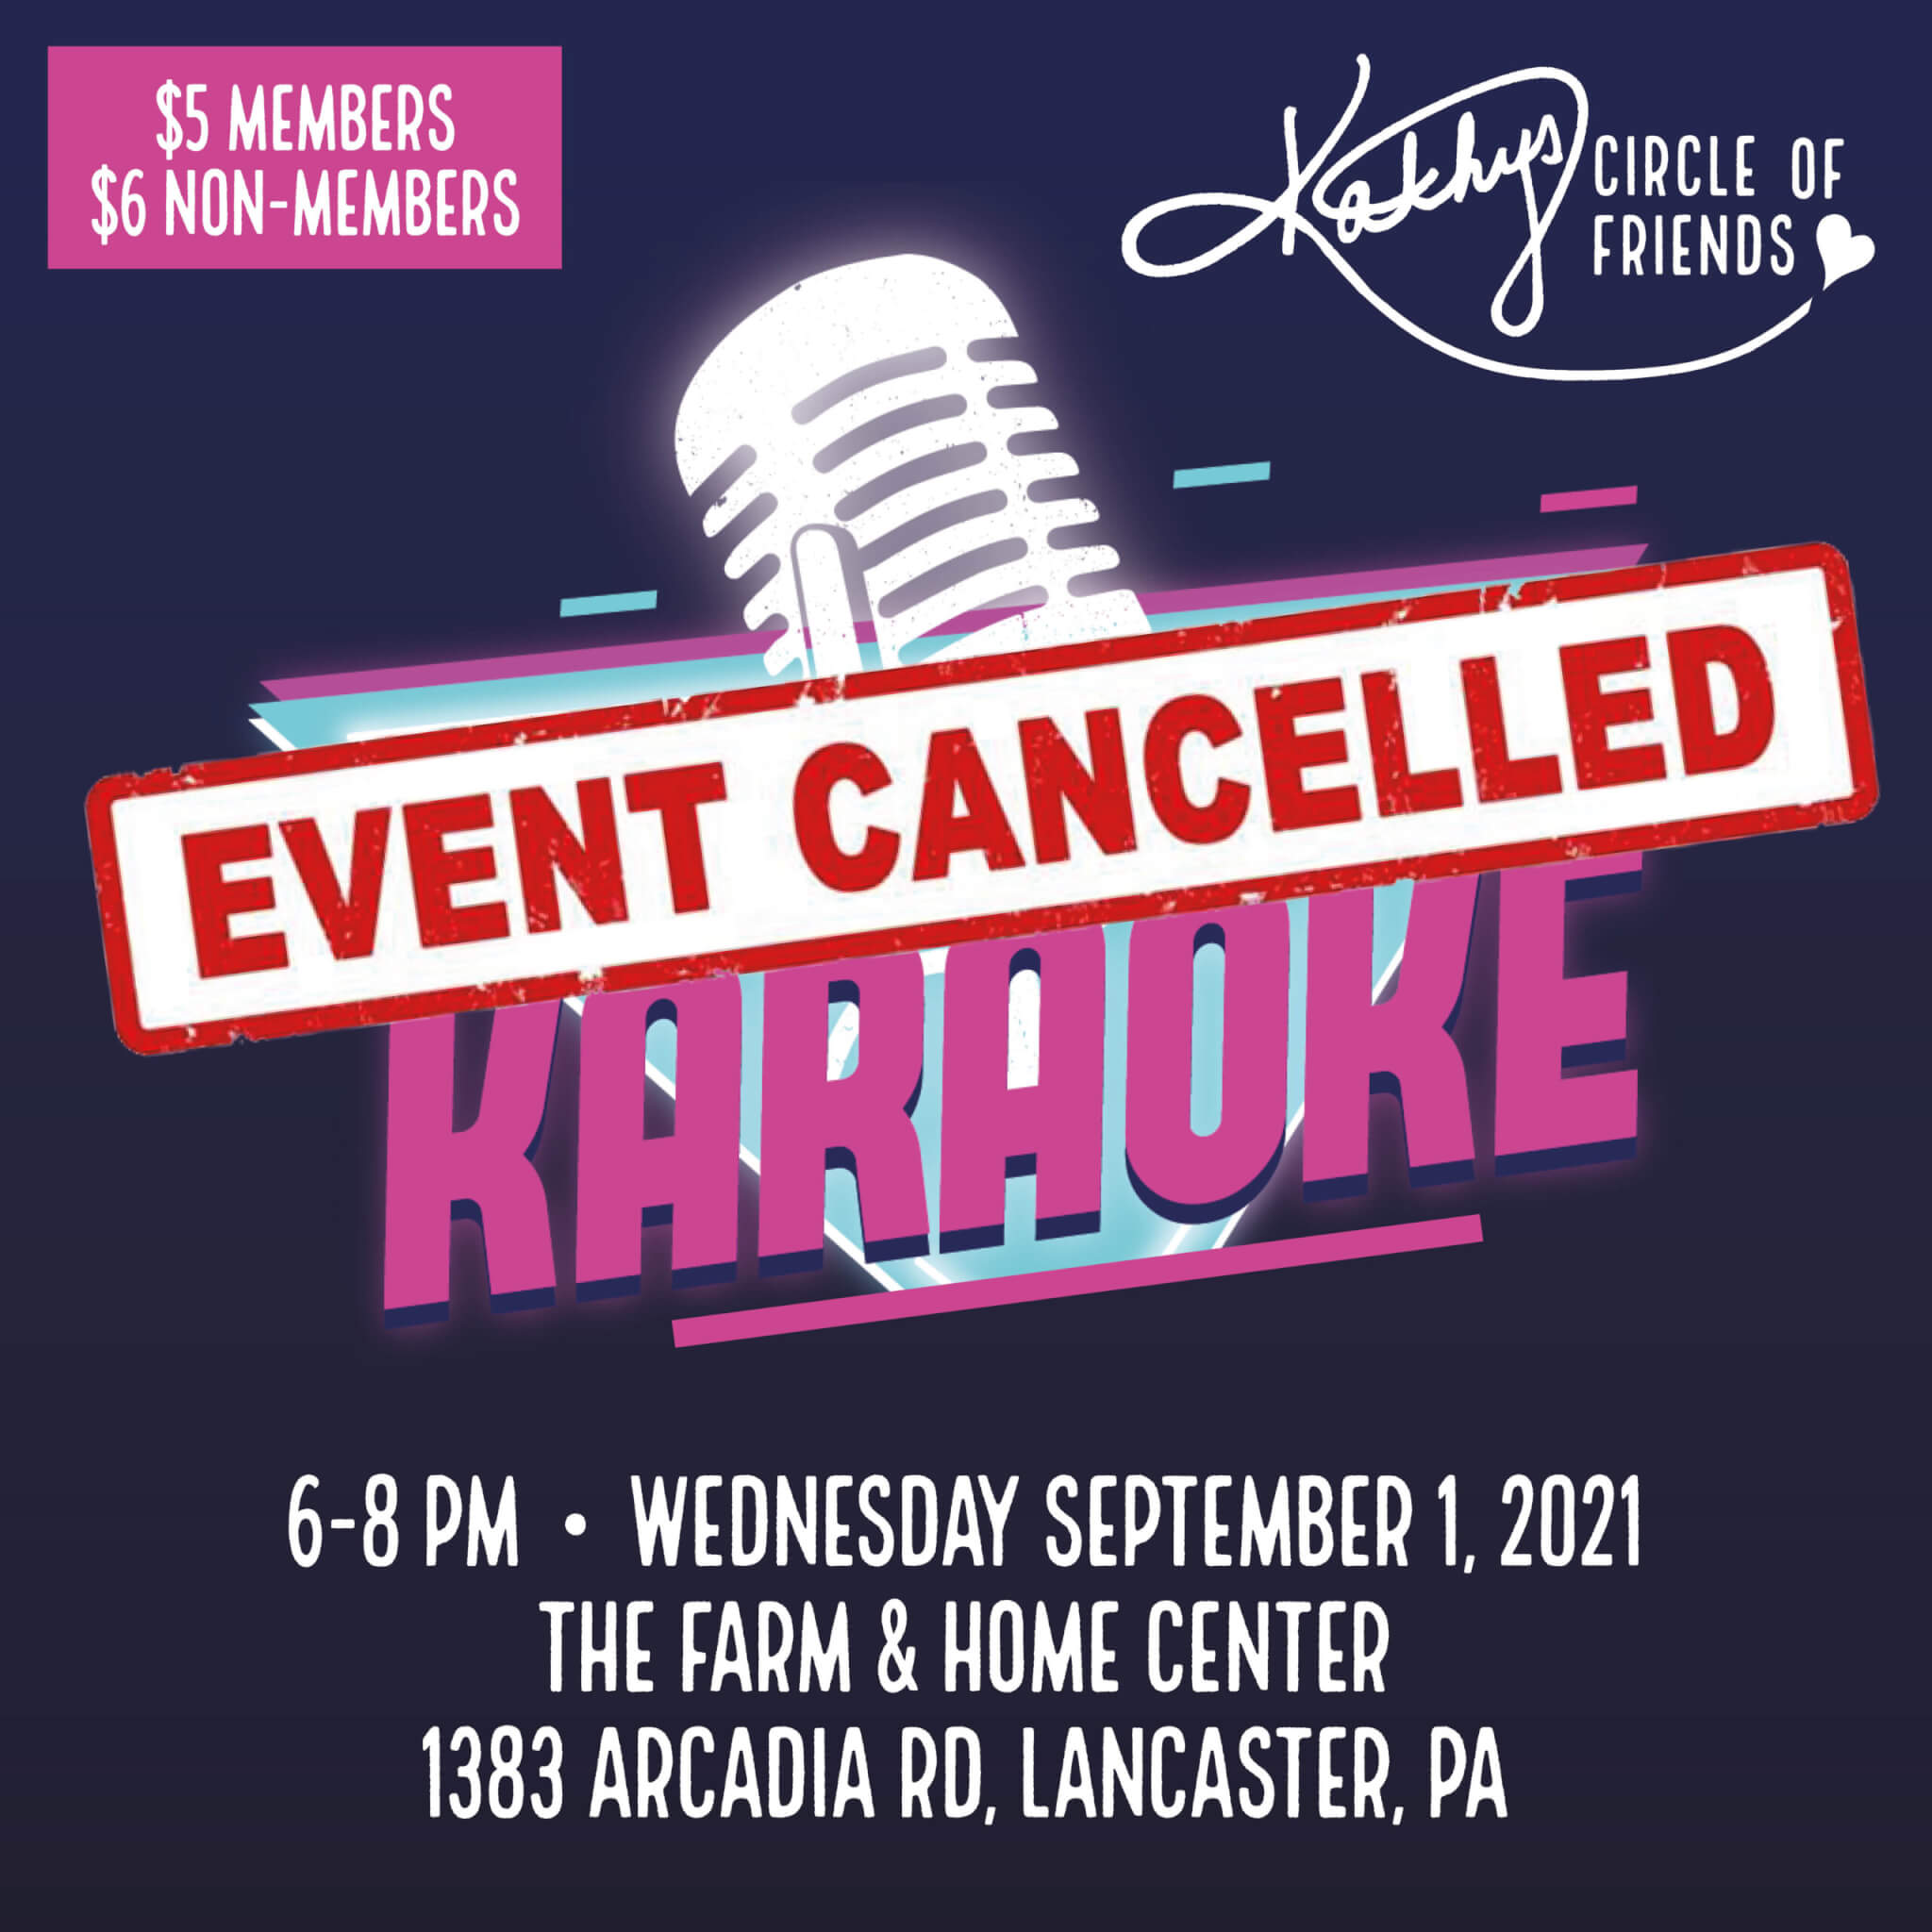 CANCELLED DUE TO WEATHER - Karaoke Night